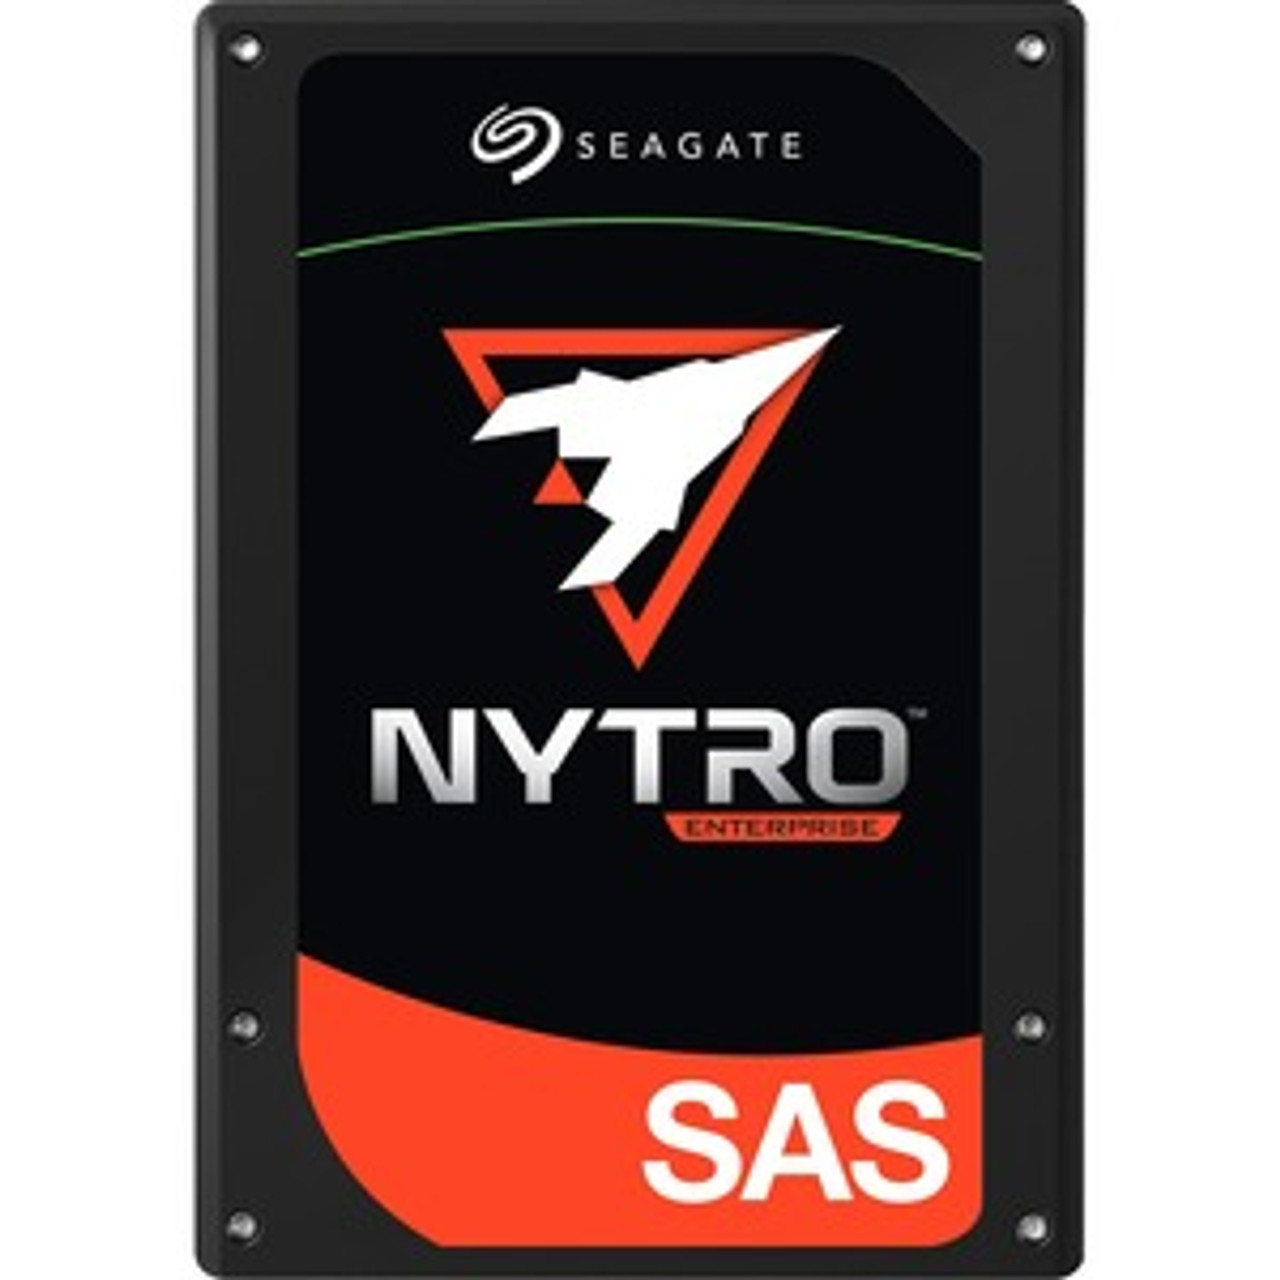 XS3840SE10113-5PK Seagate Nytro 3330 3.84TB eTLC SAS 12Gbps Scaled Endurance (SED) 2.5-inch Internal Solid State Drive (SSD) (5-Pack)